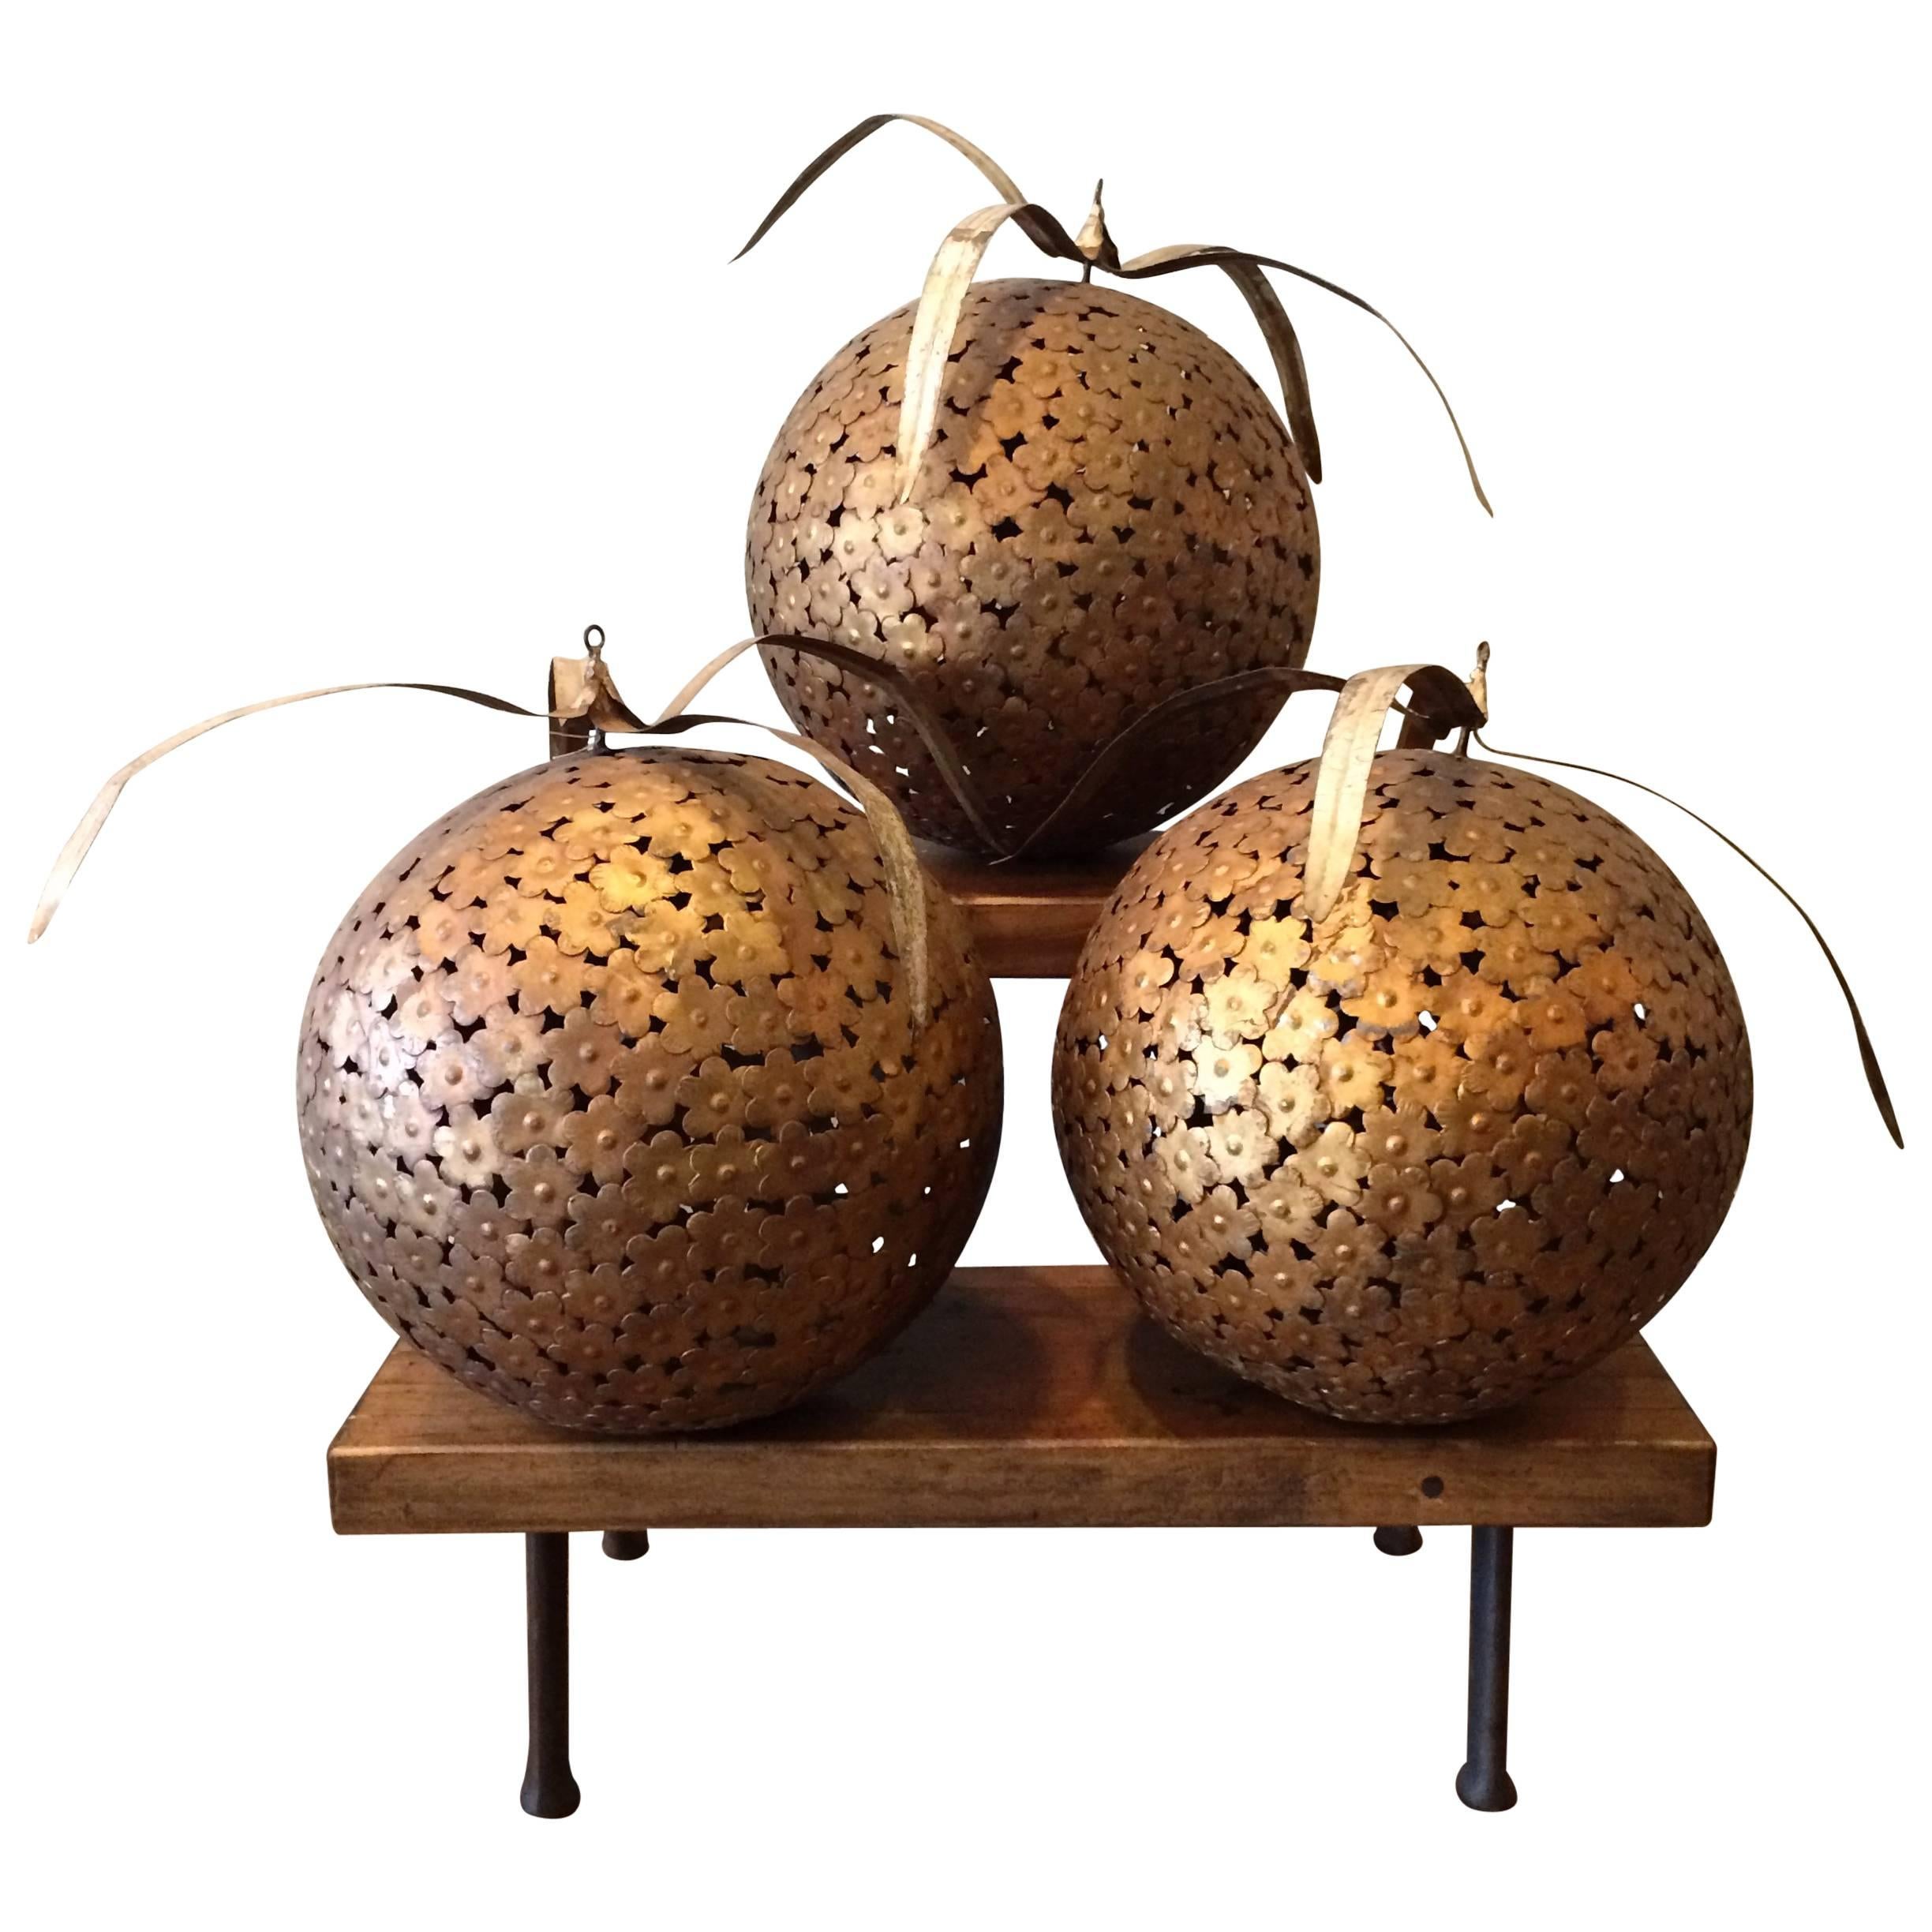 1960s Macy's Decorative Steel Ball Ornaments For Sale